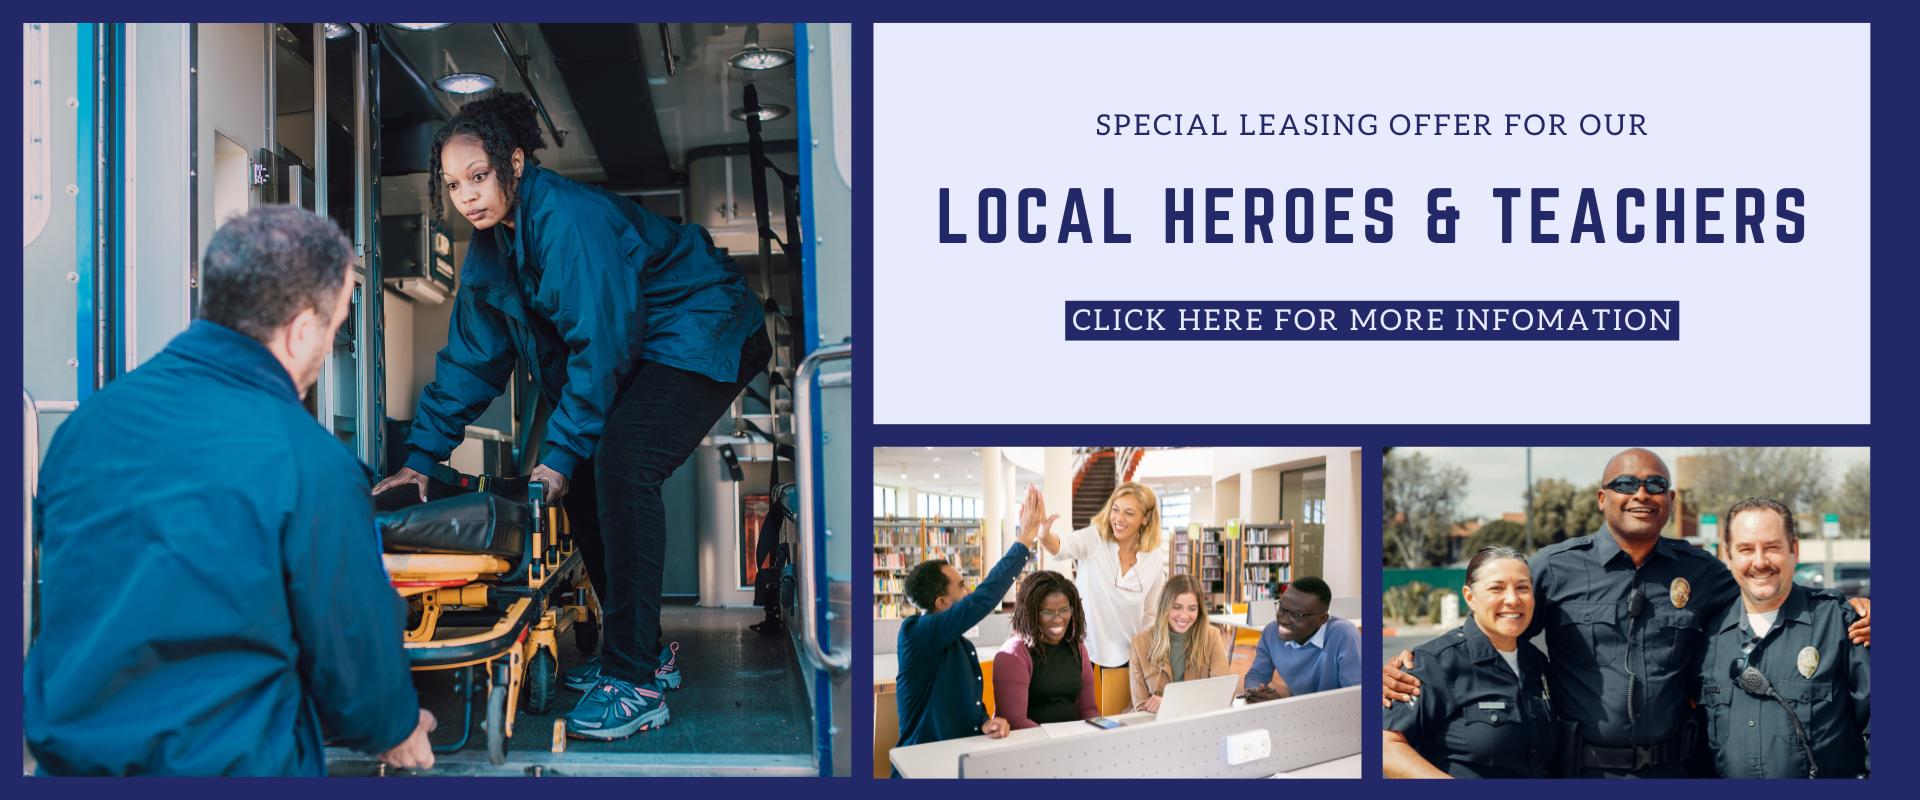 Special leasing offer  for our 

local heroes and teachers

click here for more details